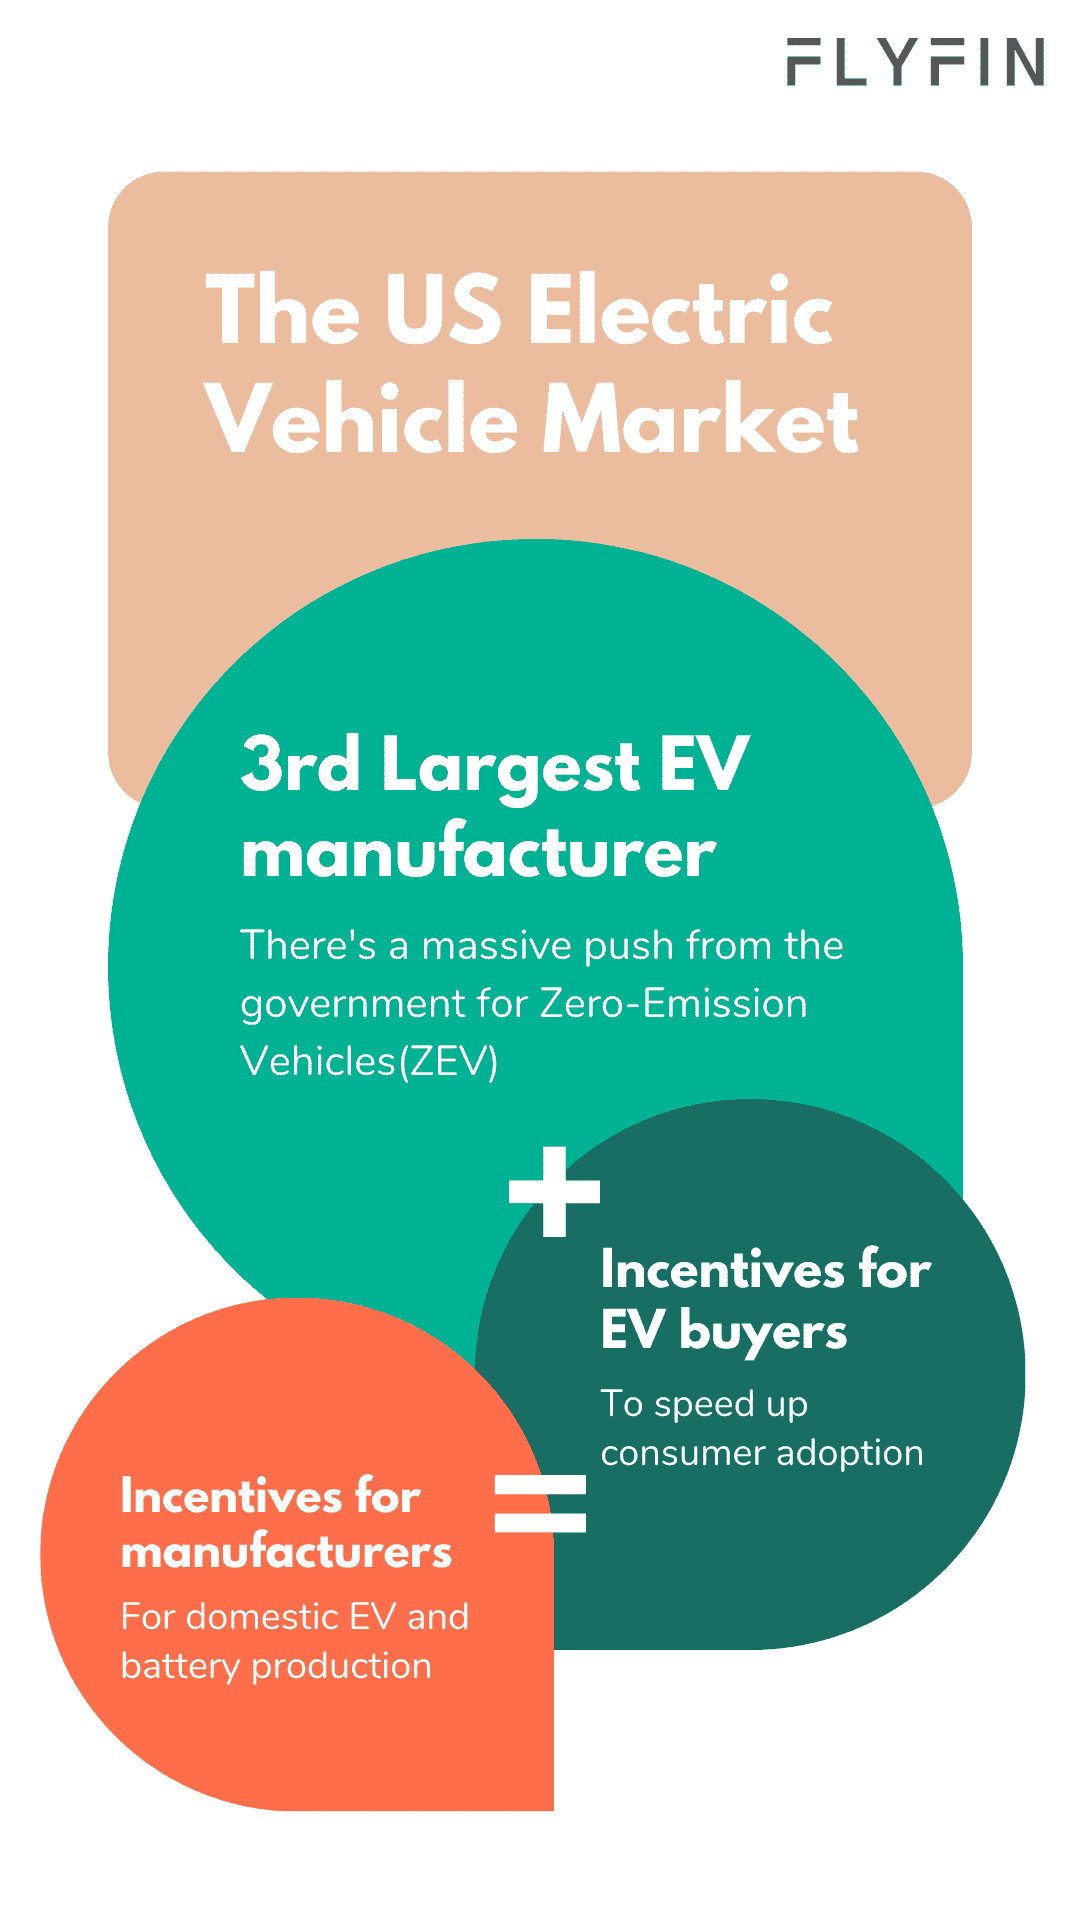 Image showing the US electric vehicle market with a focus on government incentives for EV buyers and manufacturers. 3rd largest EV manufacturer mentioned. No relevance to self-employed, 1099, freelancer, or taxes.